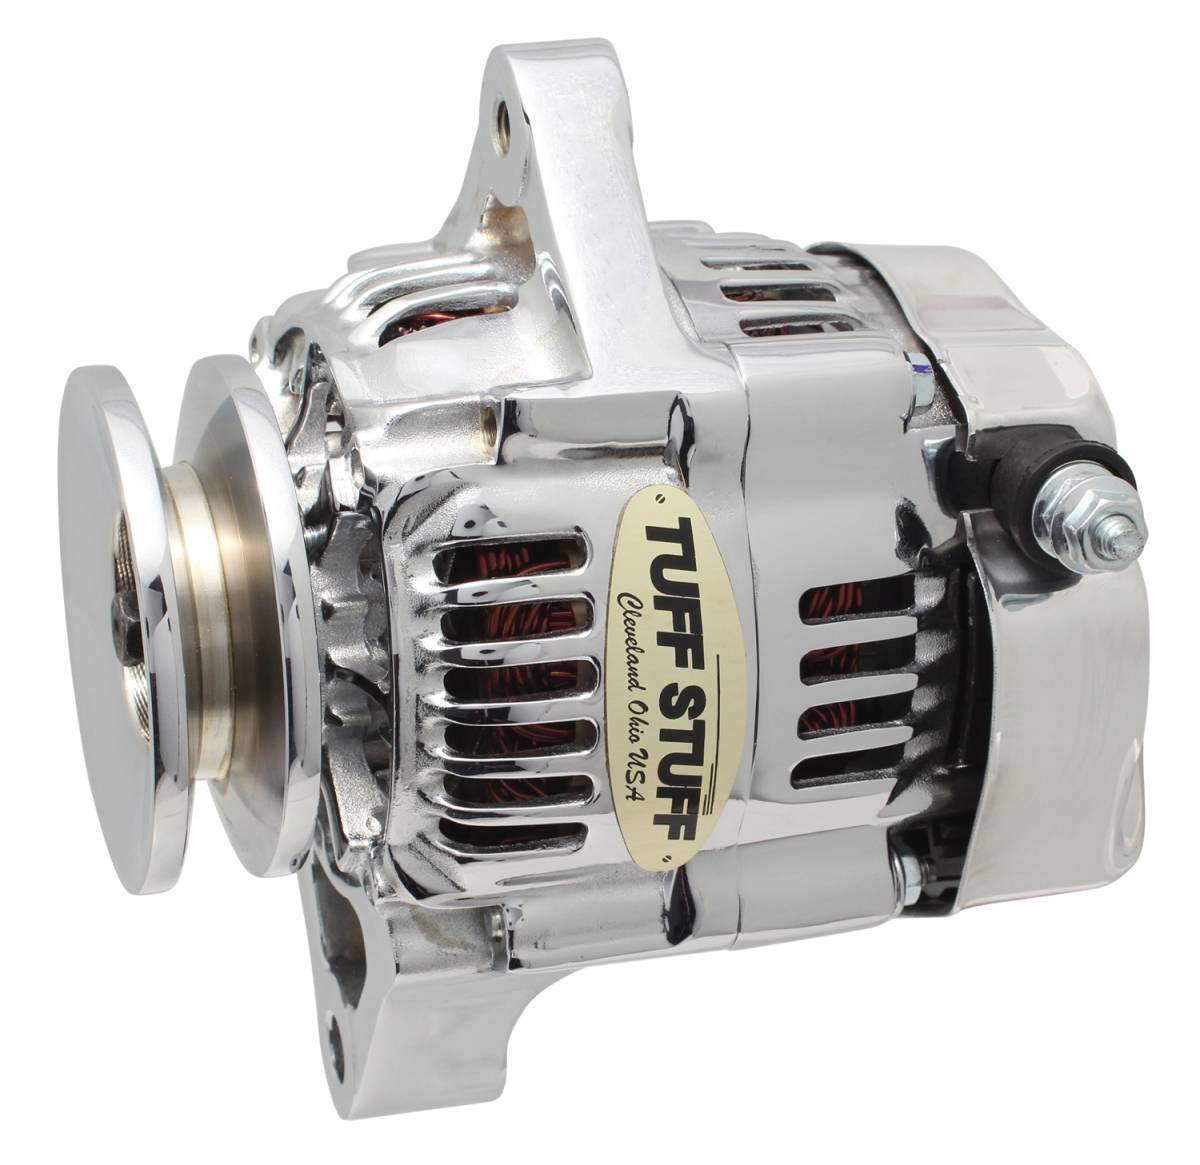 Tuff Stuff Performance - Compact Design Alternator 55 AMP Ultra Mini Nippondenso 1 Wire Single Groove Pulley For Use w/Performance Cars/Street Rods/Show Cars w/Low Amp Requirement Chrome 7512A